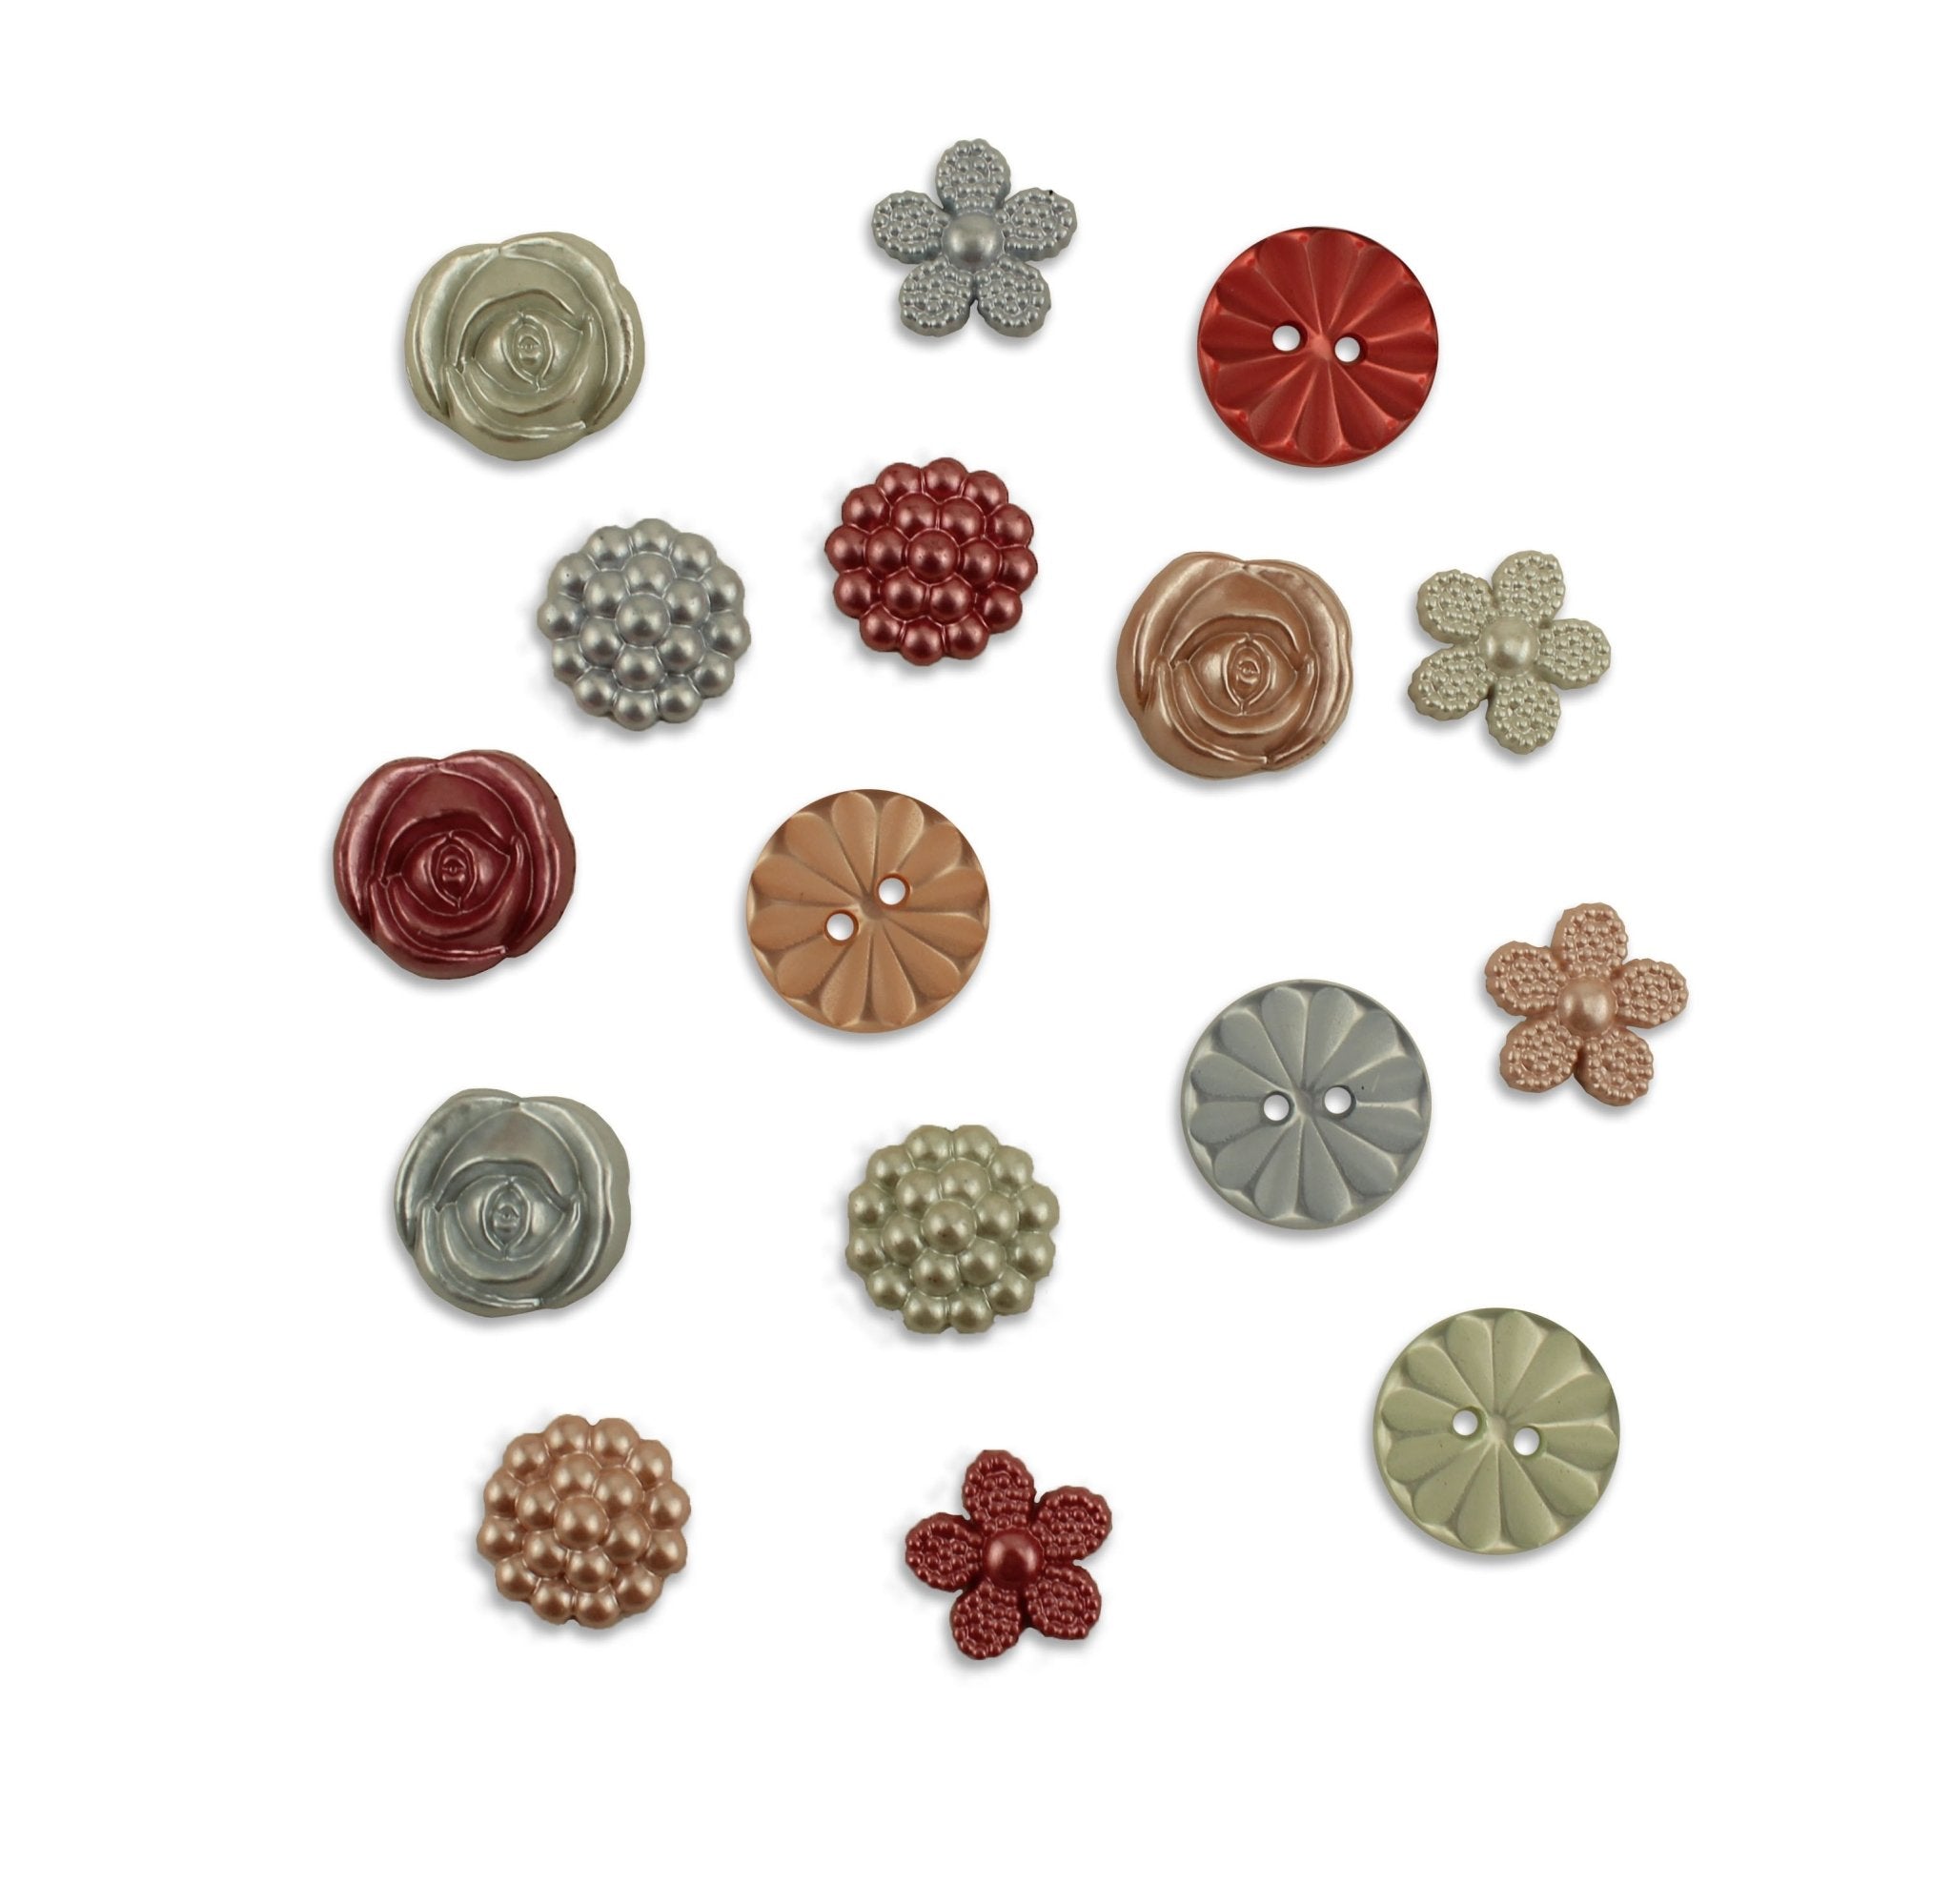 Heirloom Keepsakes-4404 - Buttons Galore and More